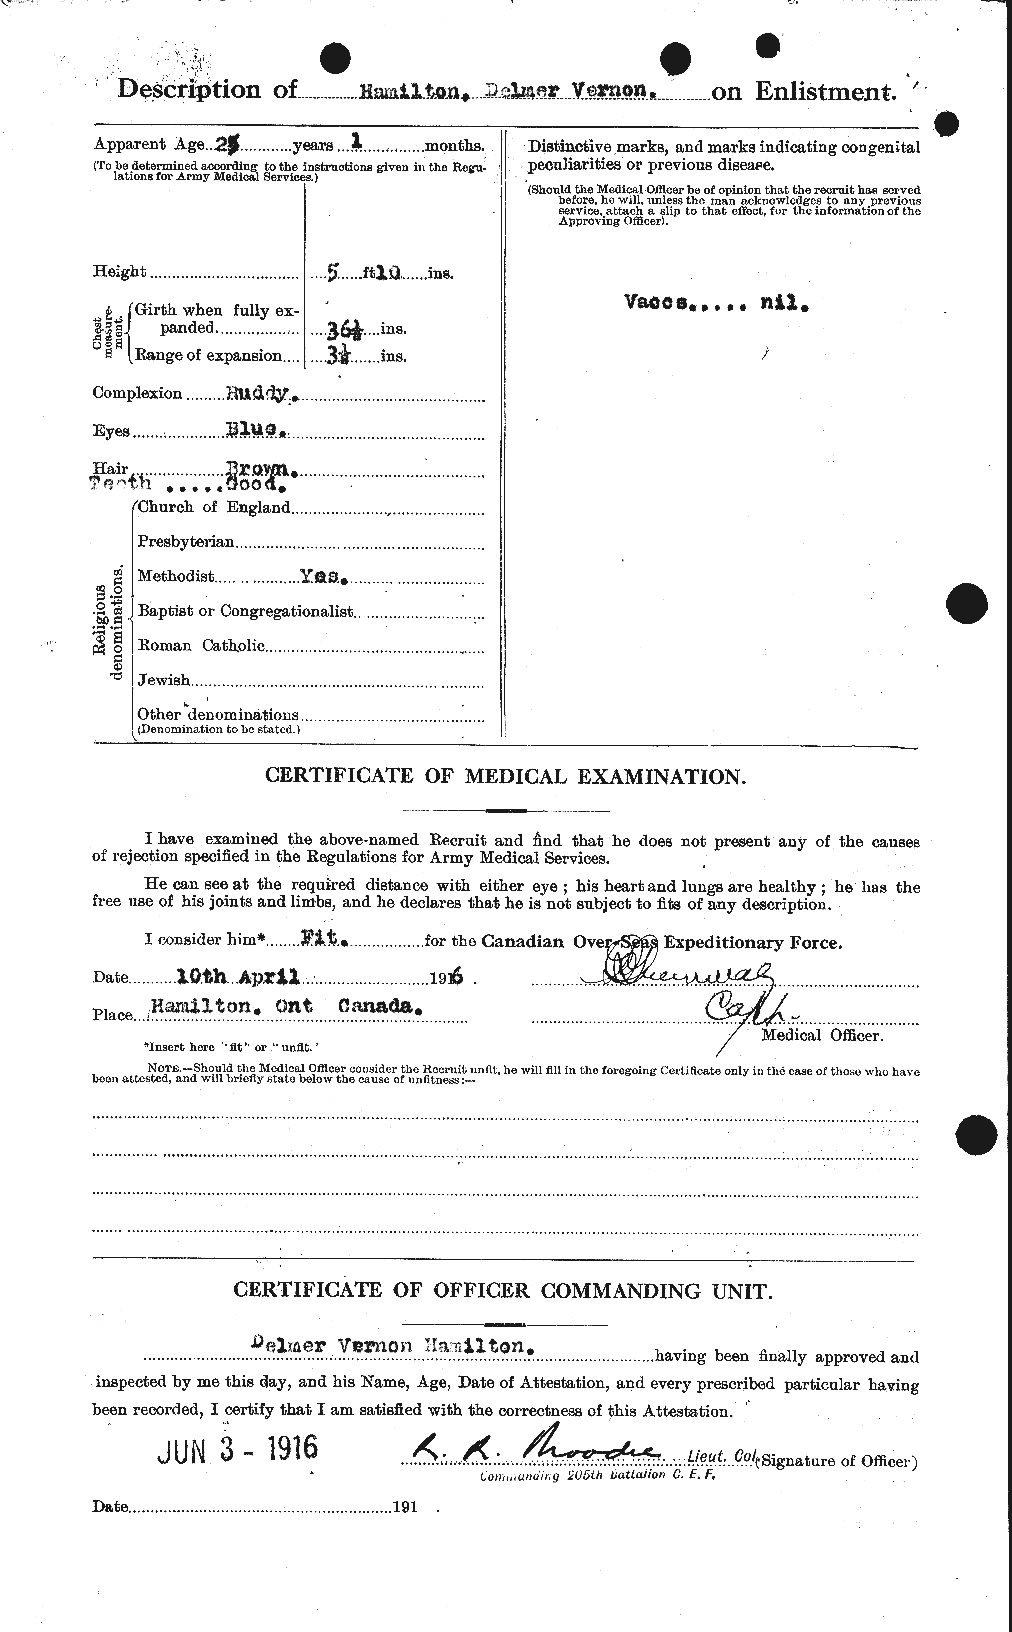 Personnel Records of the First World War - CEF 375358b